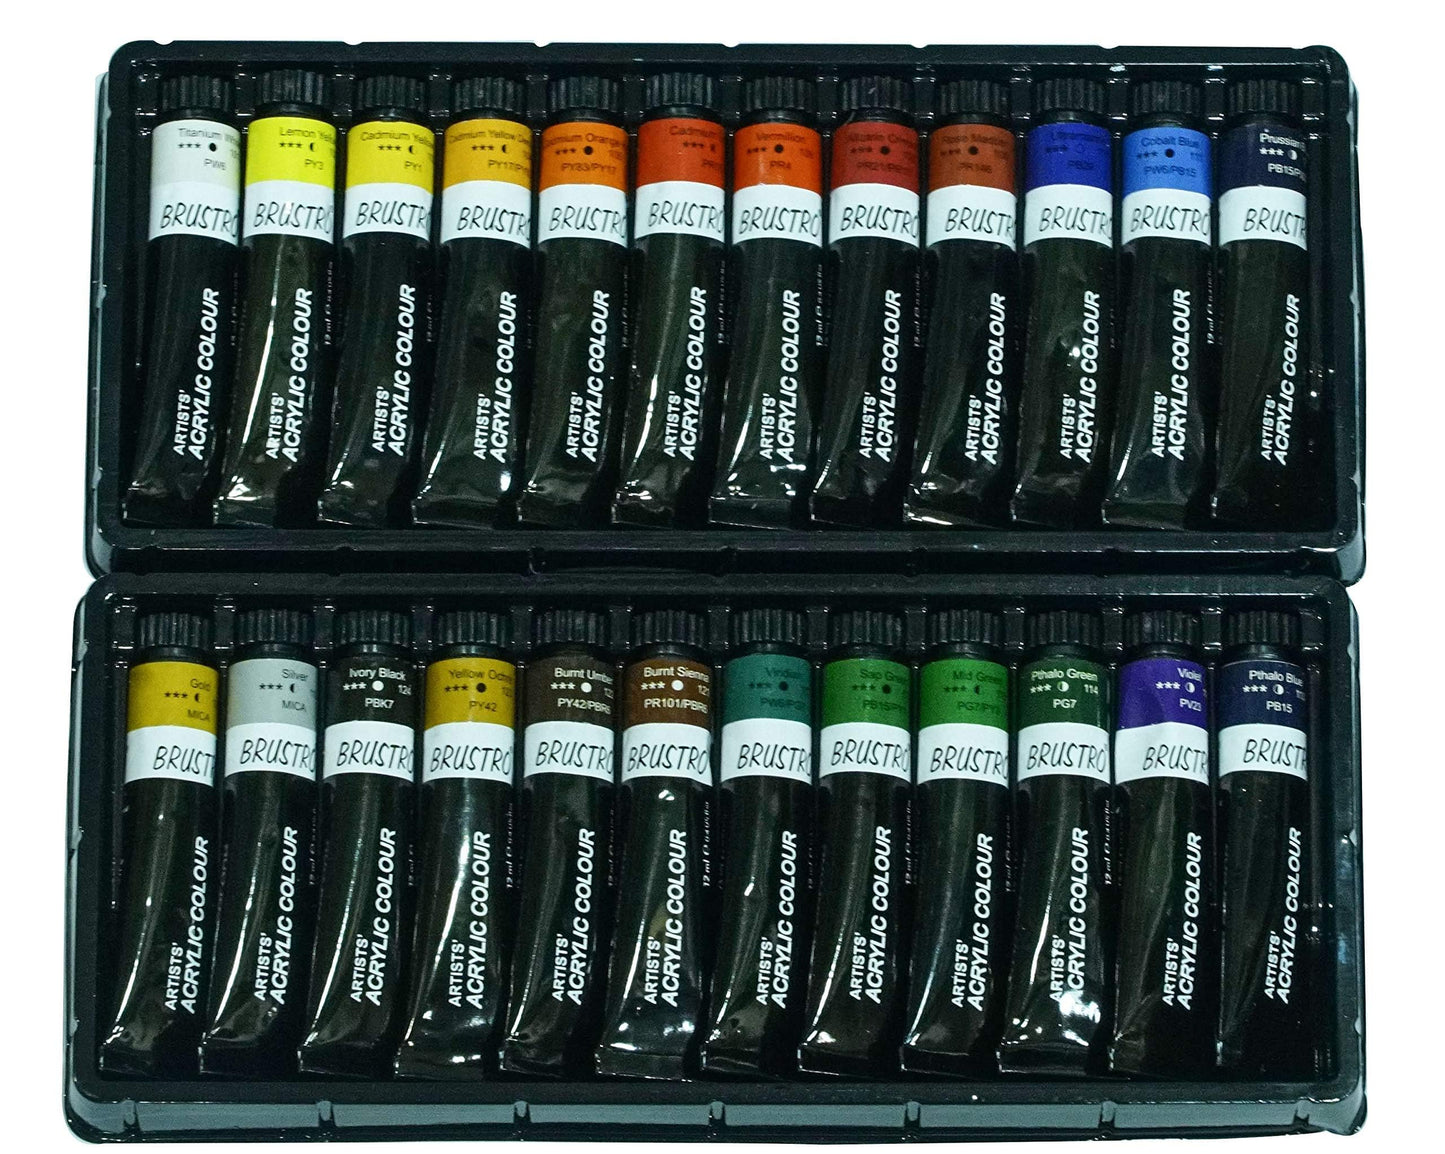 BRUSTRO Acrylic Paint Set of 24, Multicolour 12ml Tubes with Acrylic Papers 400 GSM A5, (Contains 18 + 6 Free Sheets) and VelveTouch Artist Brushes set of 6